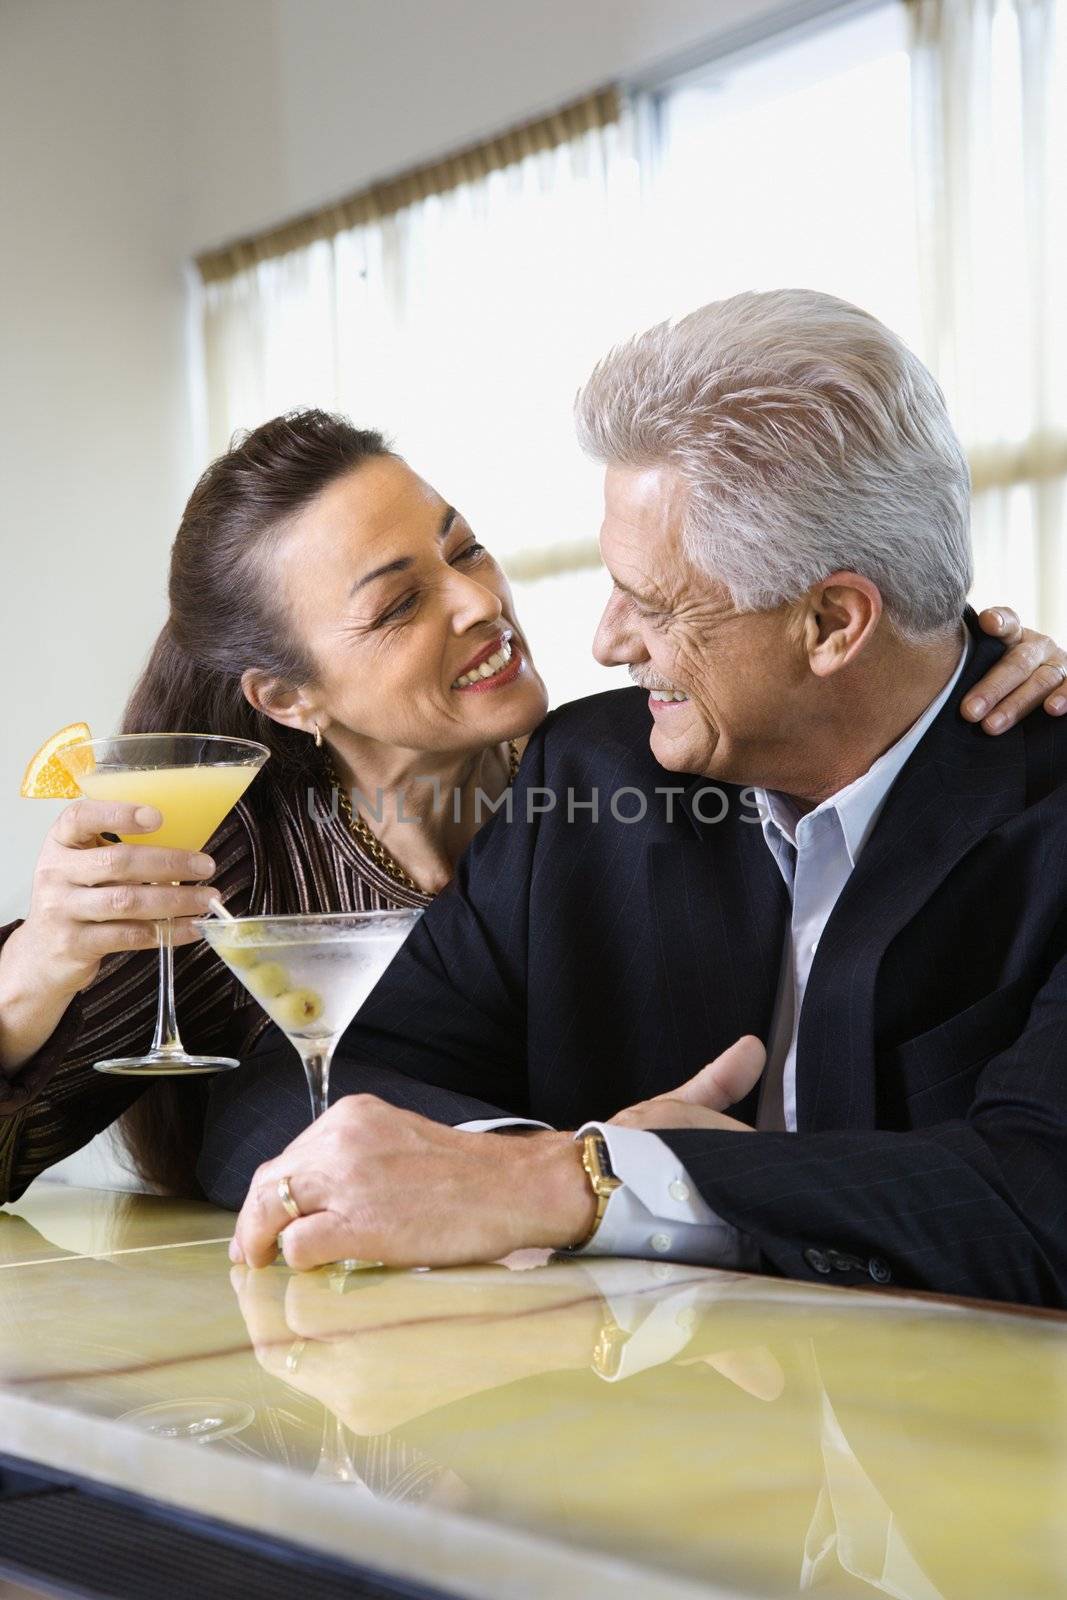 Caucasian mature adult male and prime adult female sitting at bar with cocktails.